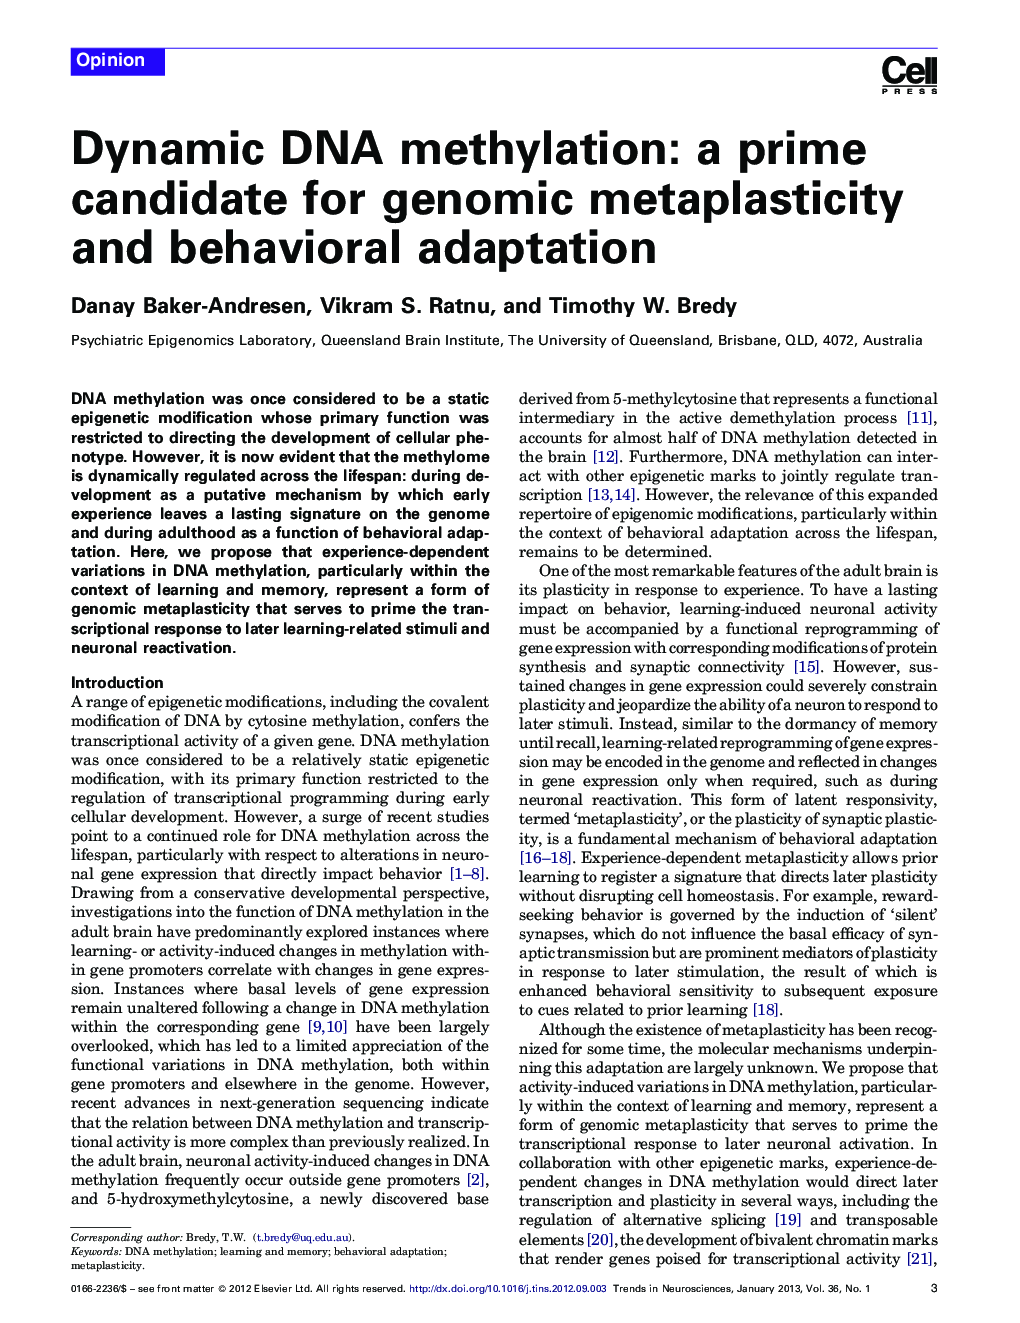 Dynamic DNA methylation: a prime candidate for genomic metaplasticity and behavioral adaptation